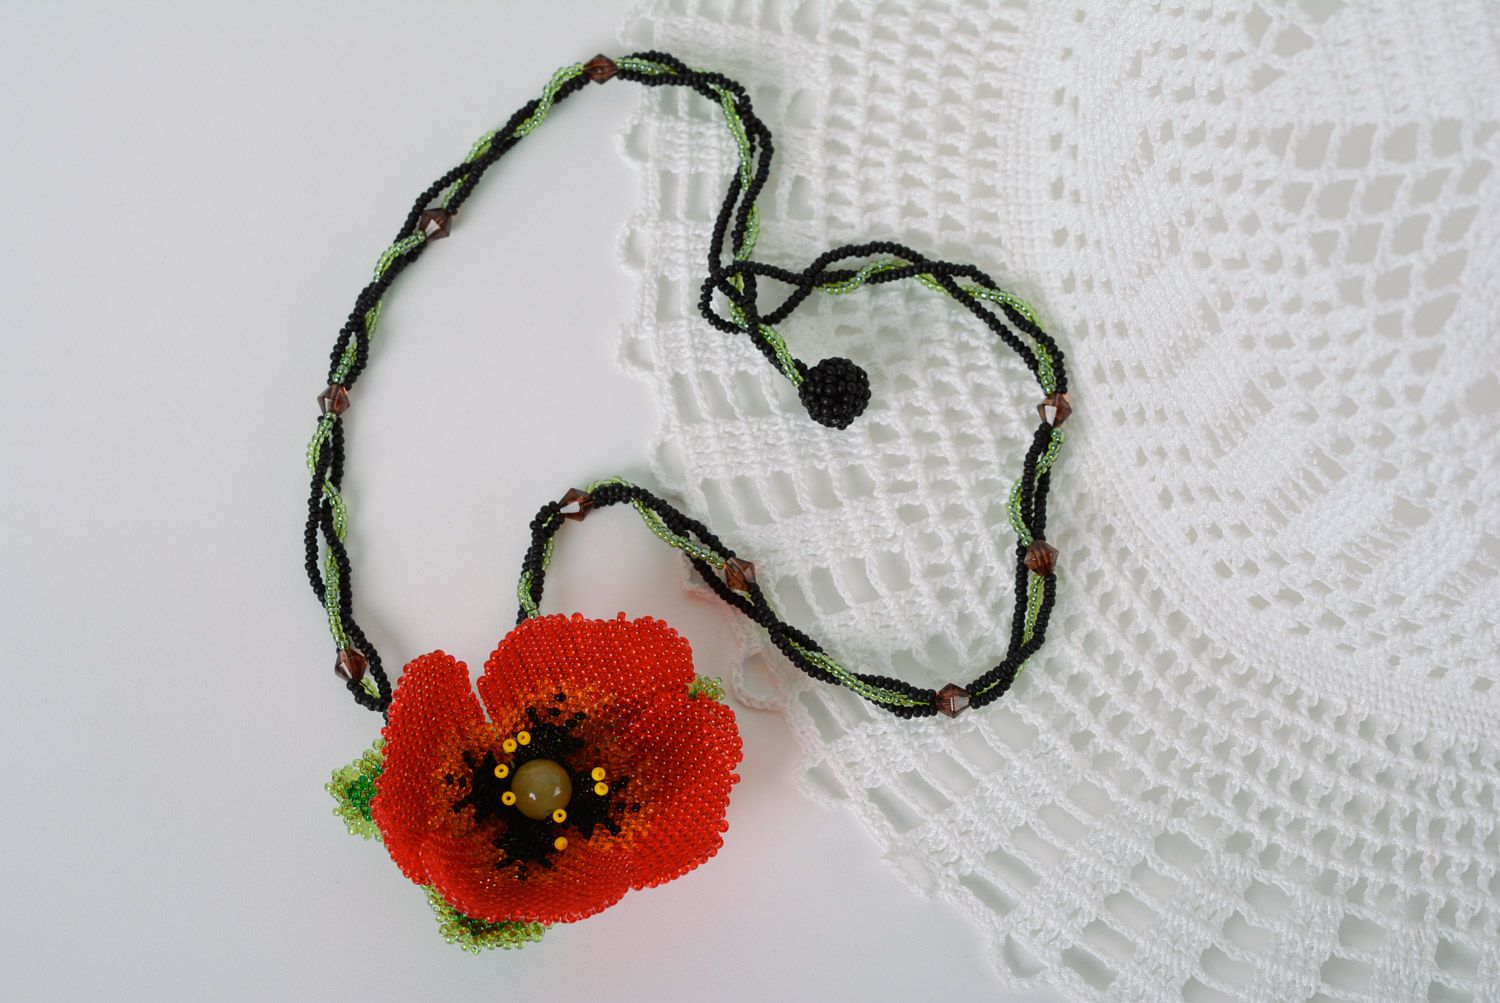 Handmade magnificent long necklace woven of beads in the shape of poppy flower photo 1